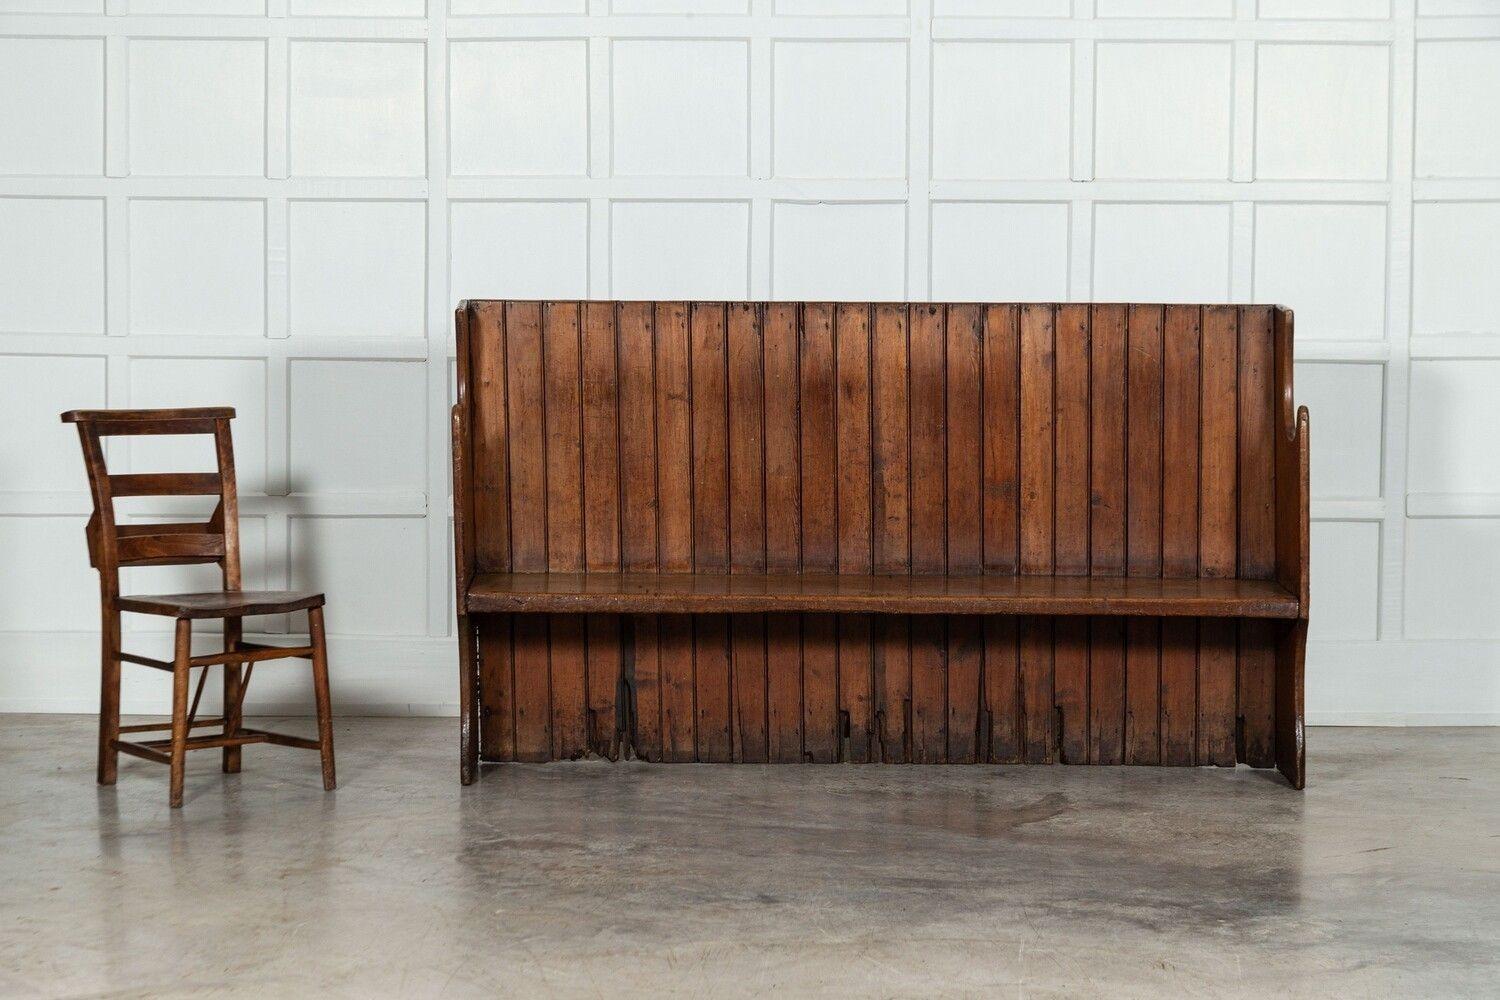 circa 1810
Large 19thC English West Country Low Back Pine Settle
Good scale West country settle with a subtle curve, lovely planked back and 2” thick curved seat with a deep attractive patina.
sku 1570
W188 x D41 x H108 cm